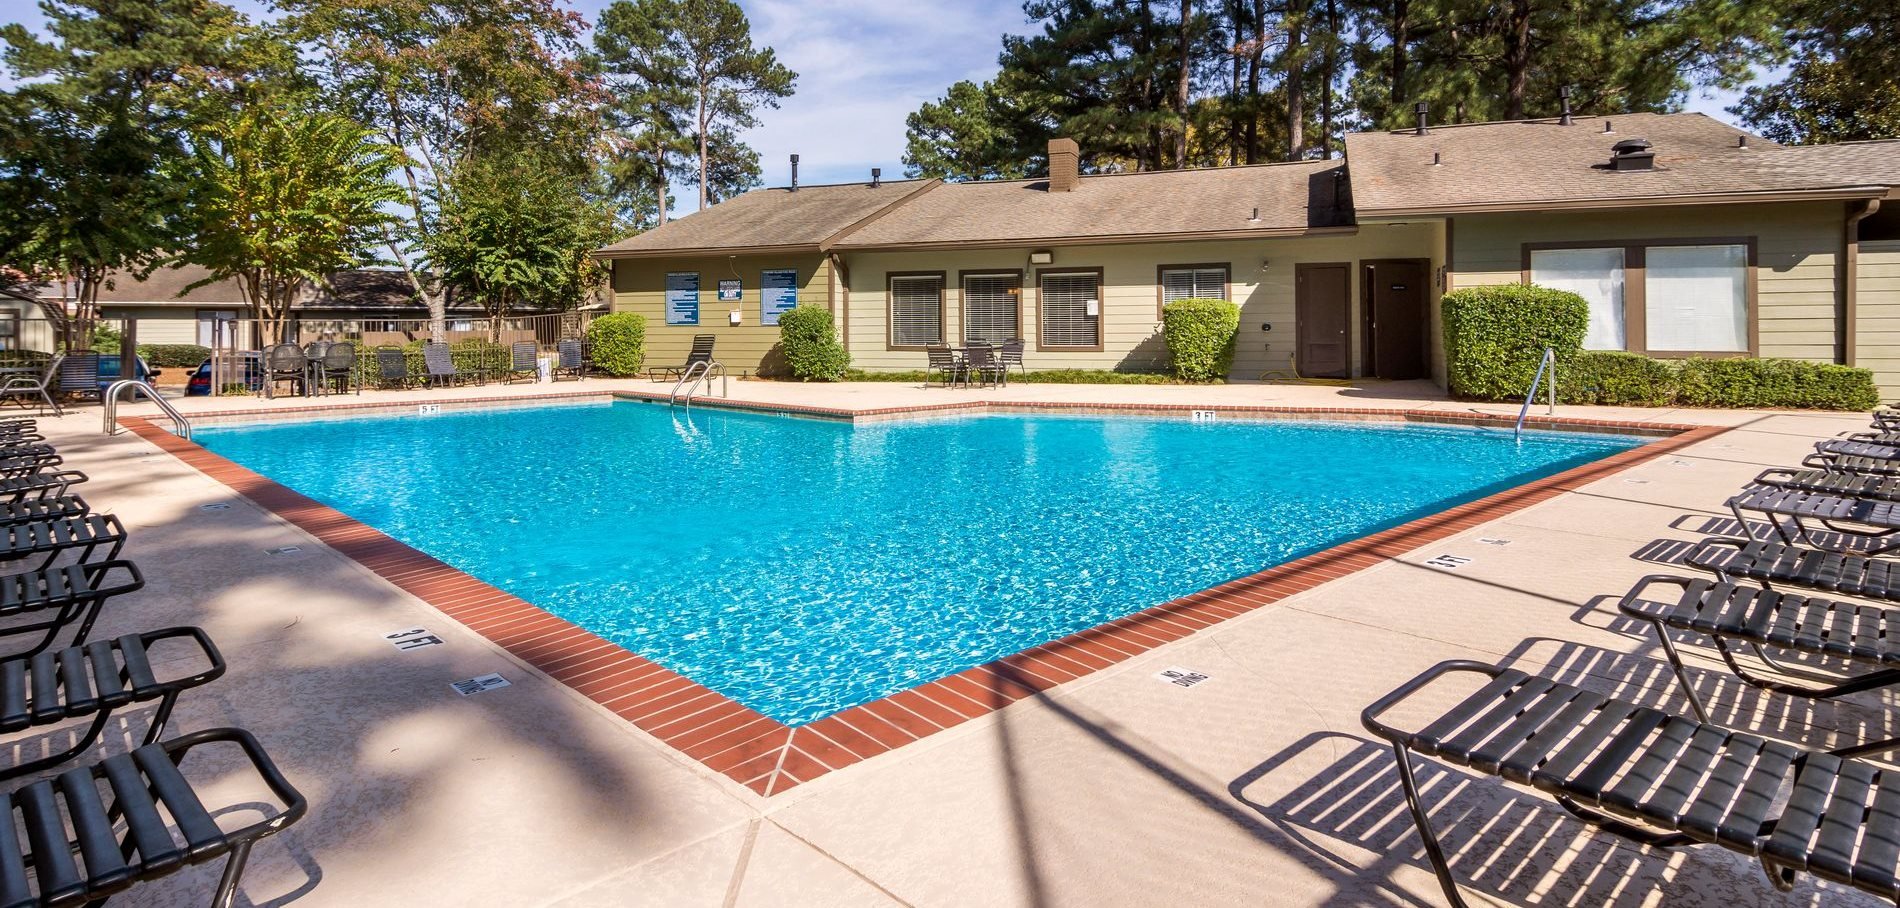 Stanford Village Apartment Homes in Norcross GA